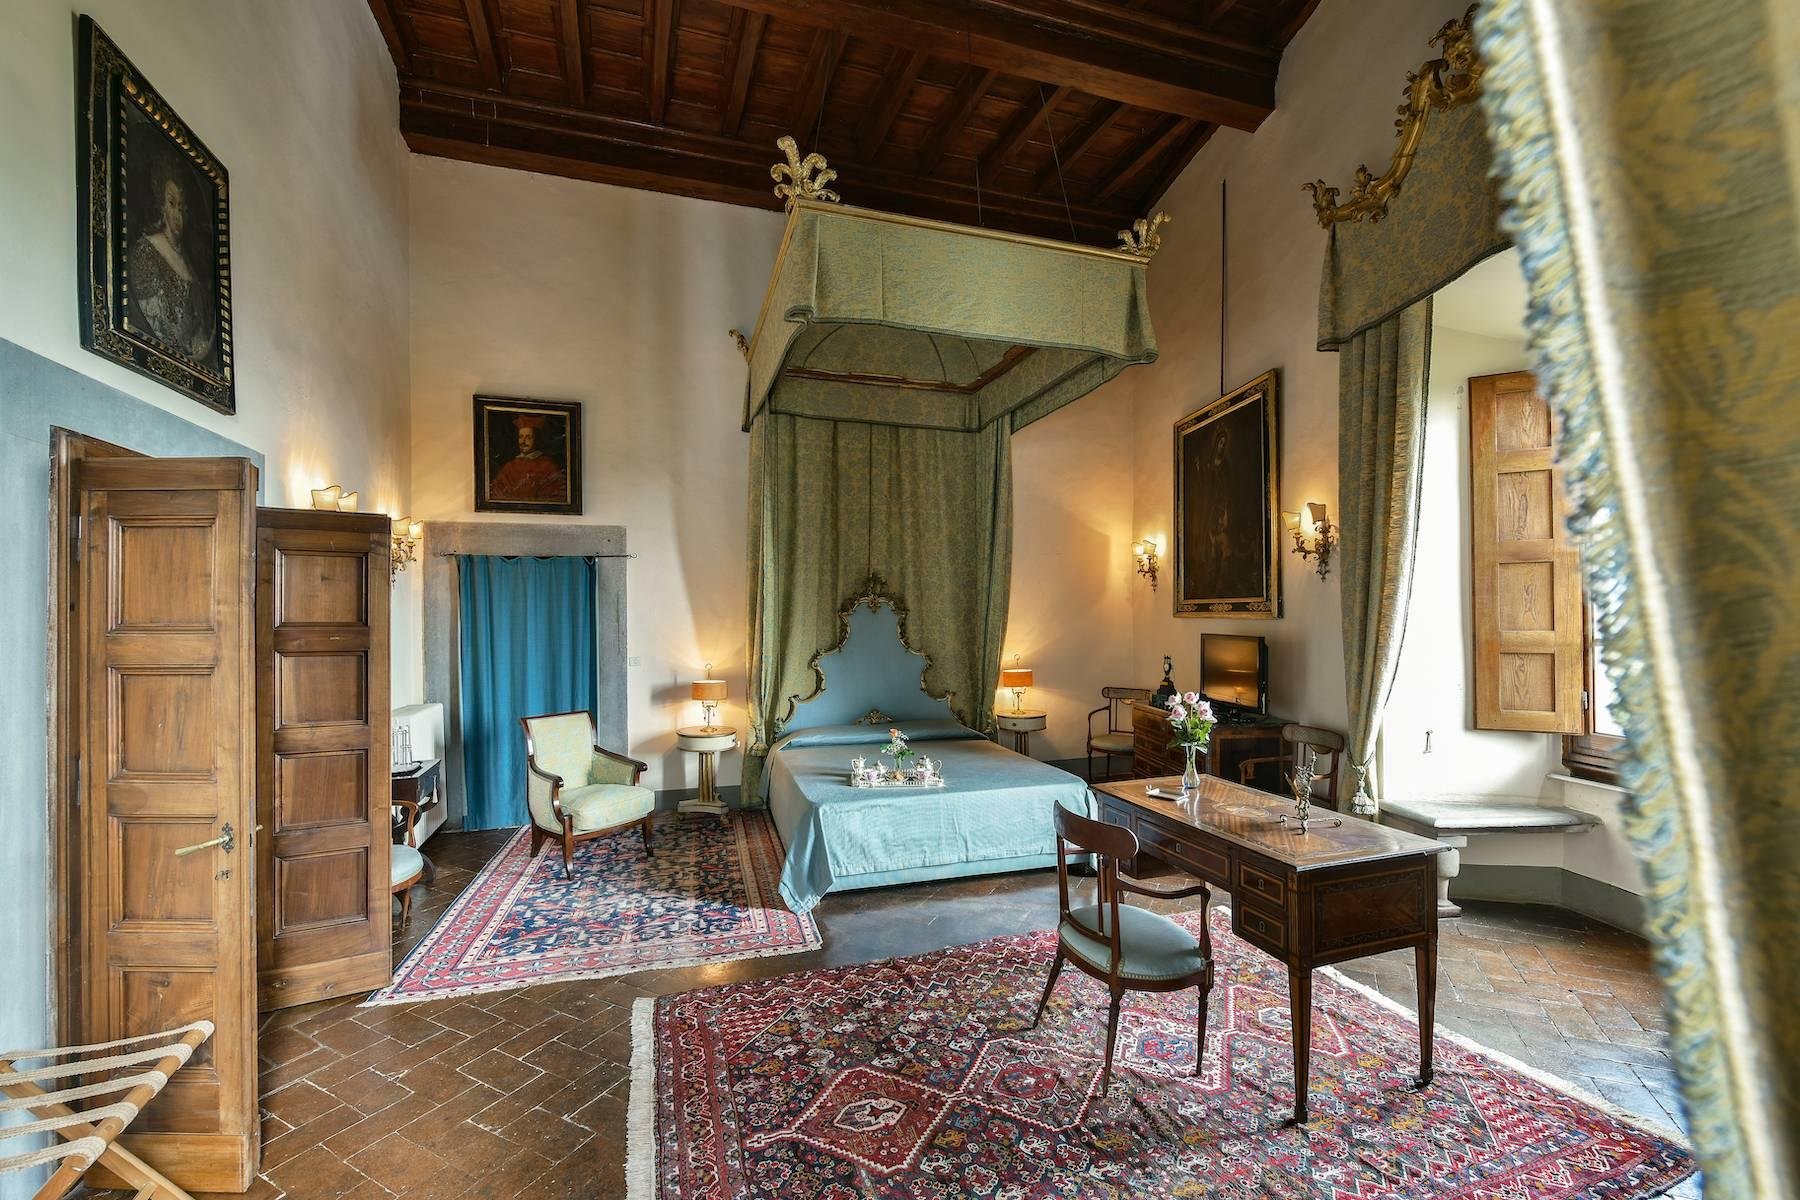 Francis York  Tuscan Villa Owned by Italian Aristocracy Available to Book as a Luxury Villa Rental 3.jpg